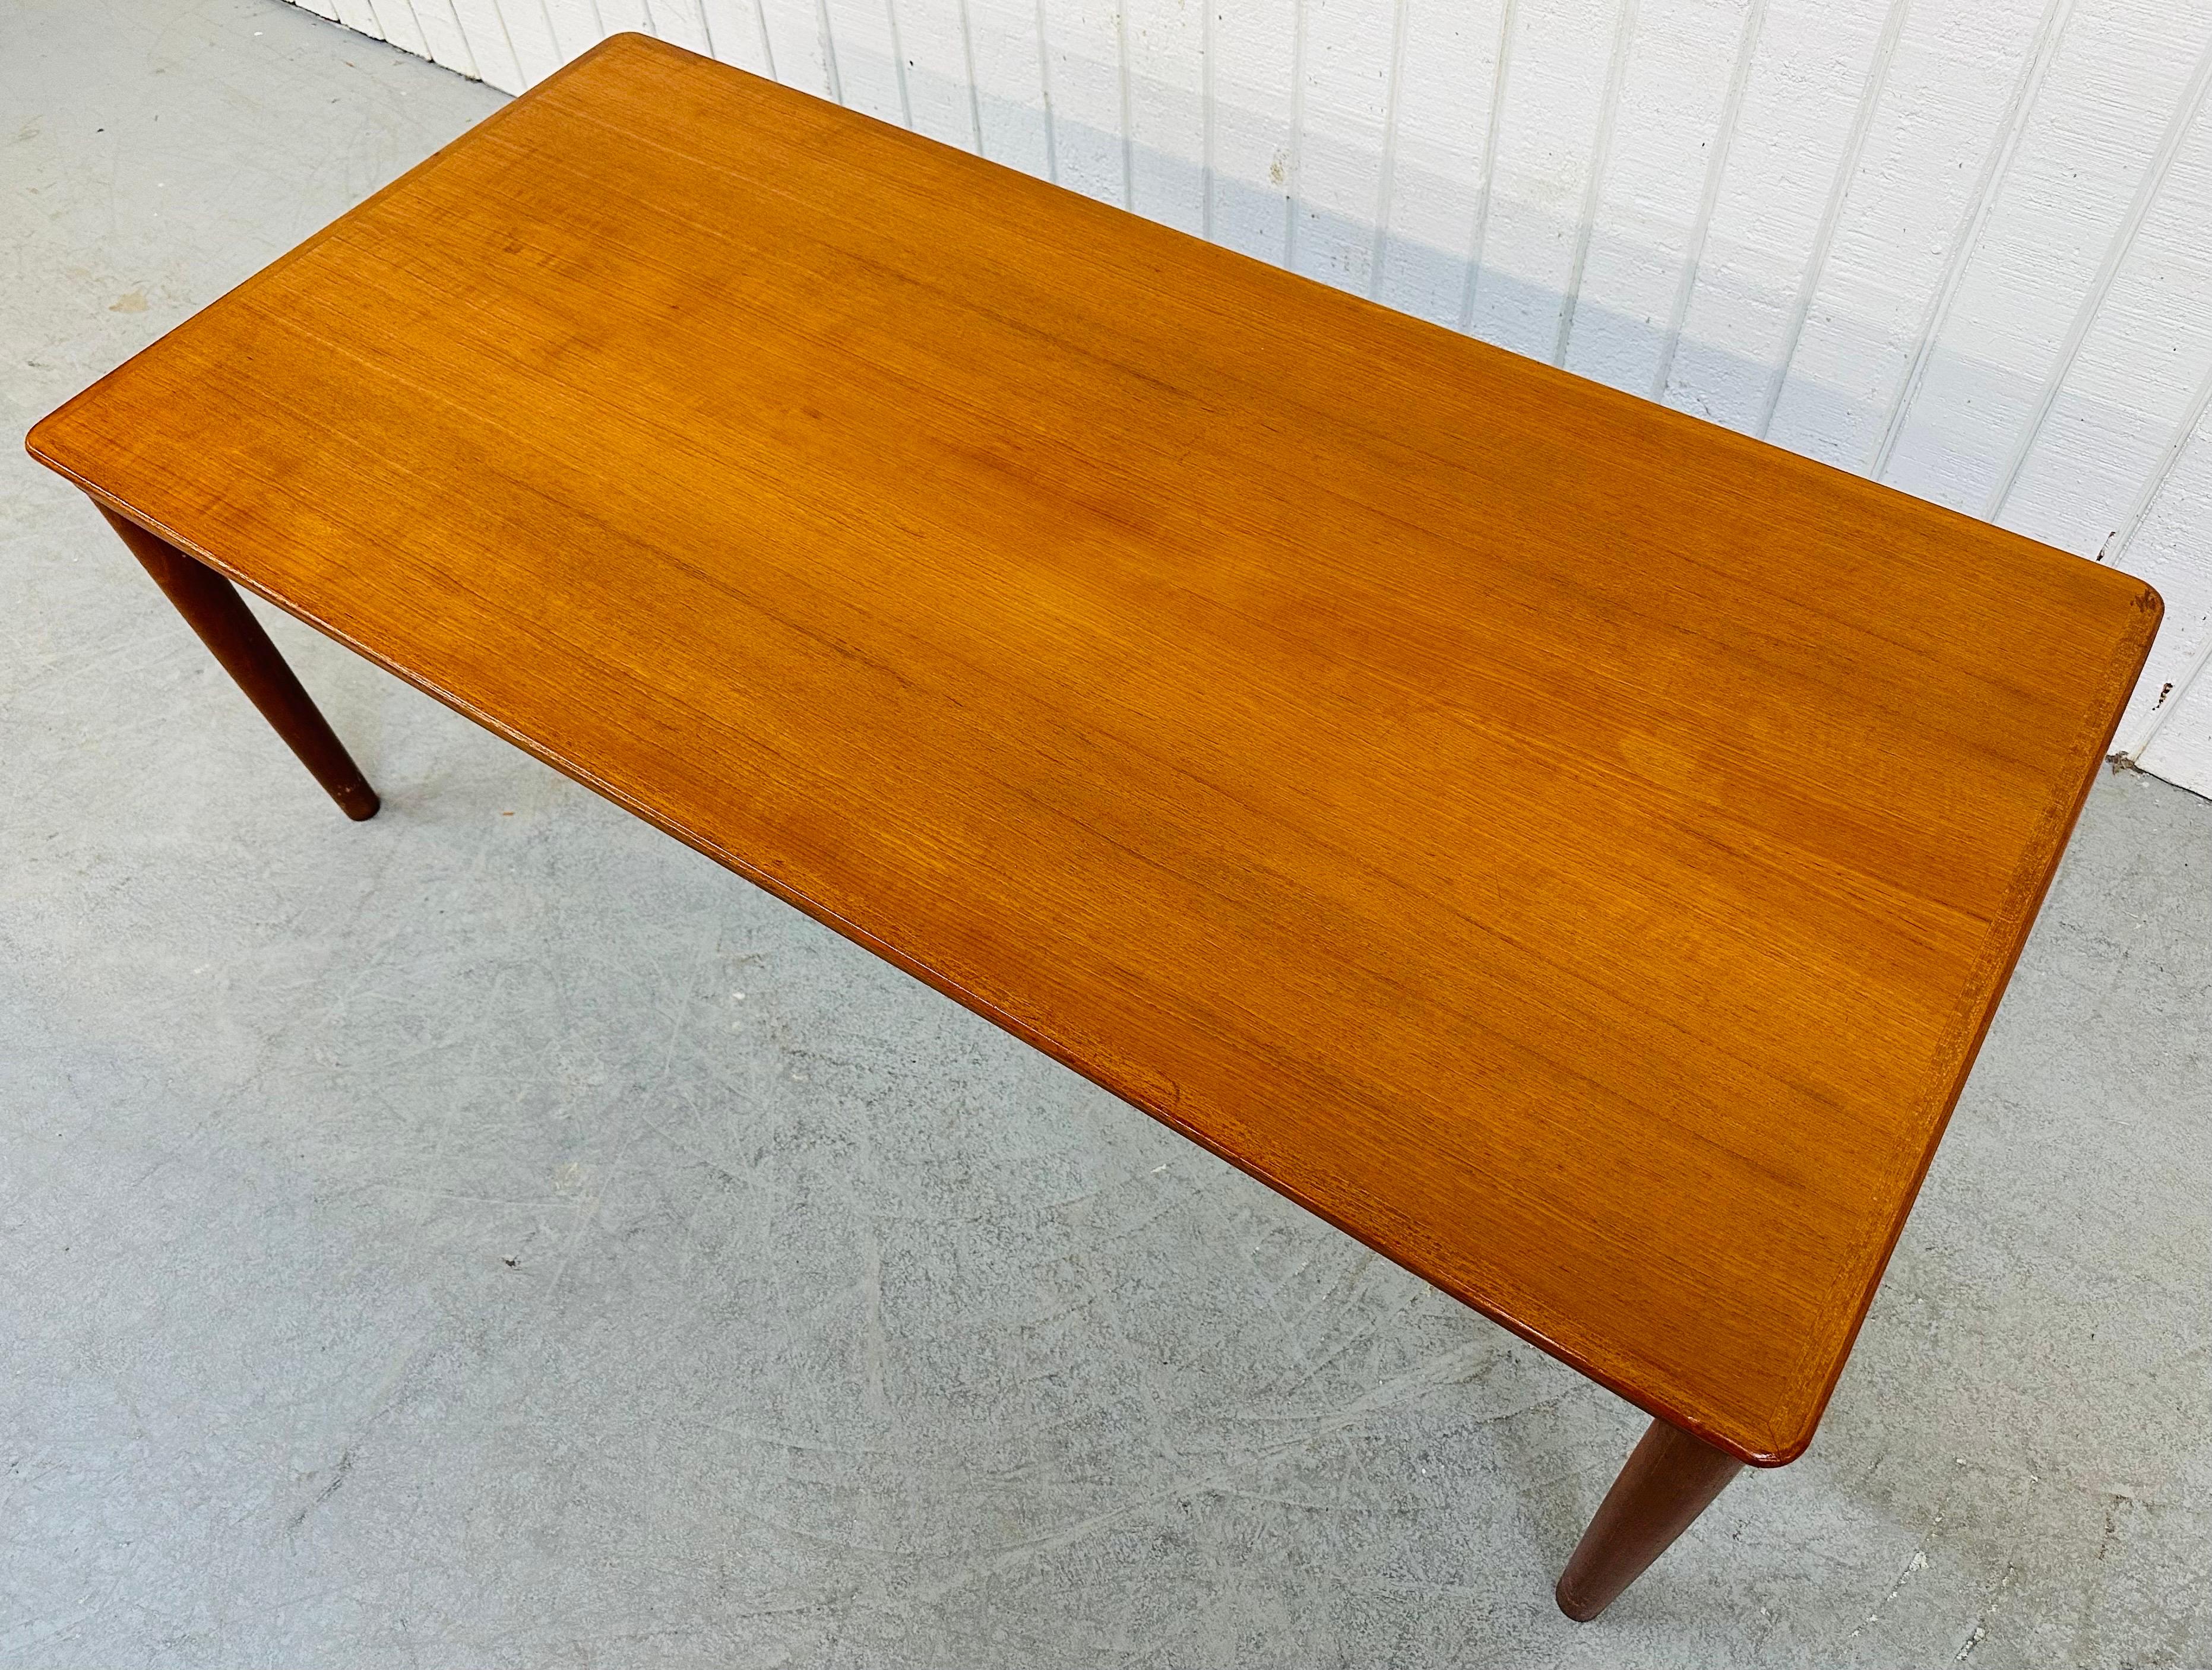 This listing is for a vintage Danish Modern Teak Coffee Table. Featuring a rectangular top, four removable legs, and a beautiful teak finish. This is an exceptional combination of quality and design by Vejle Stole.